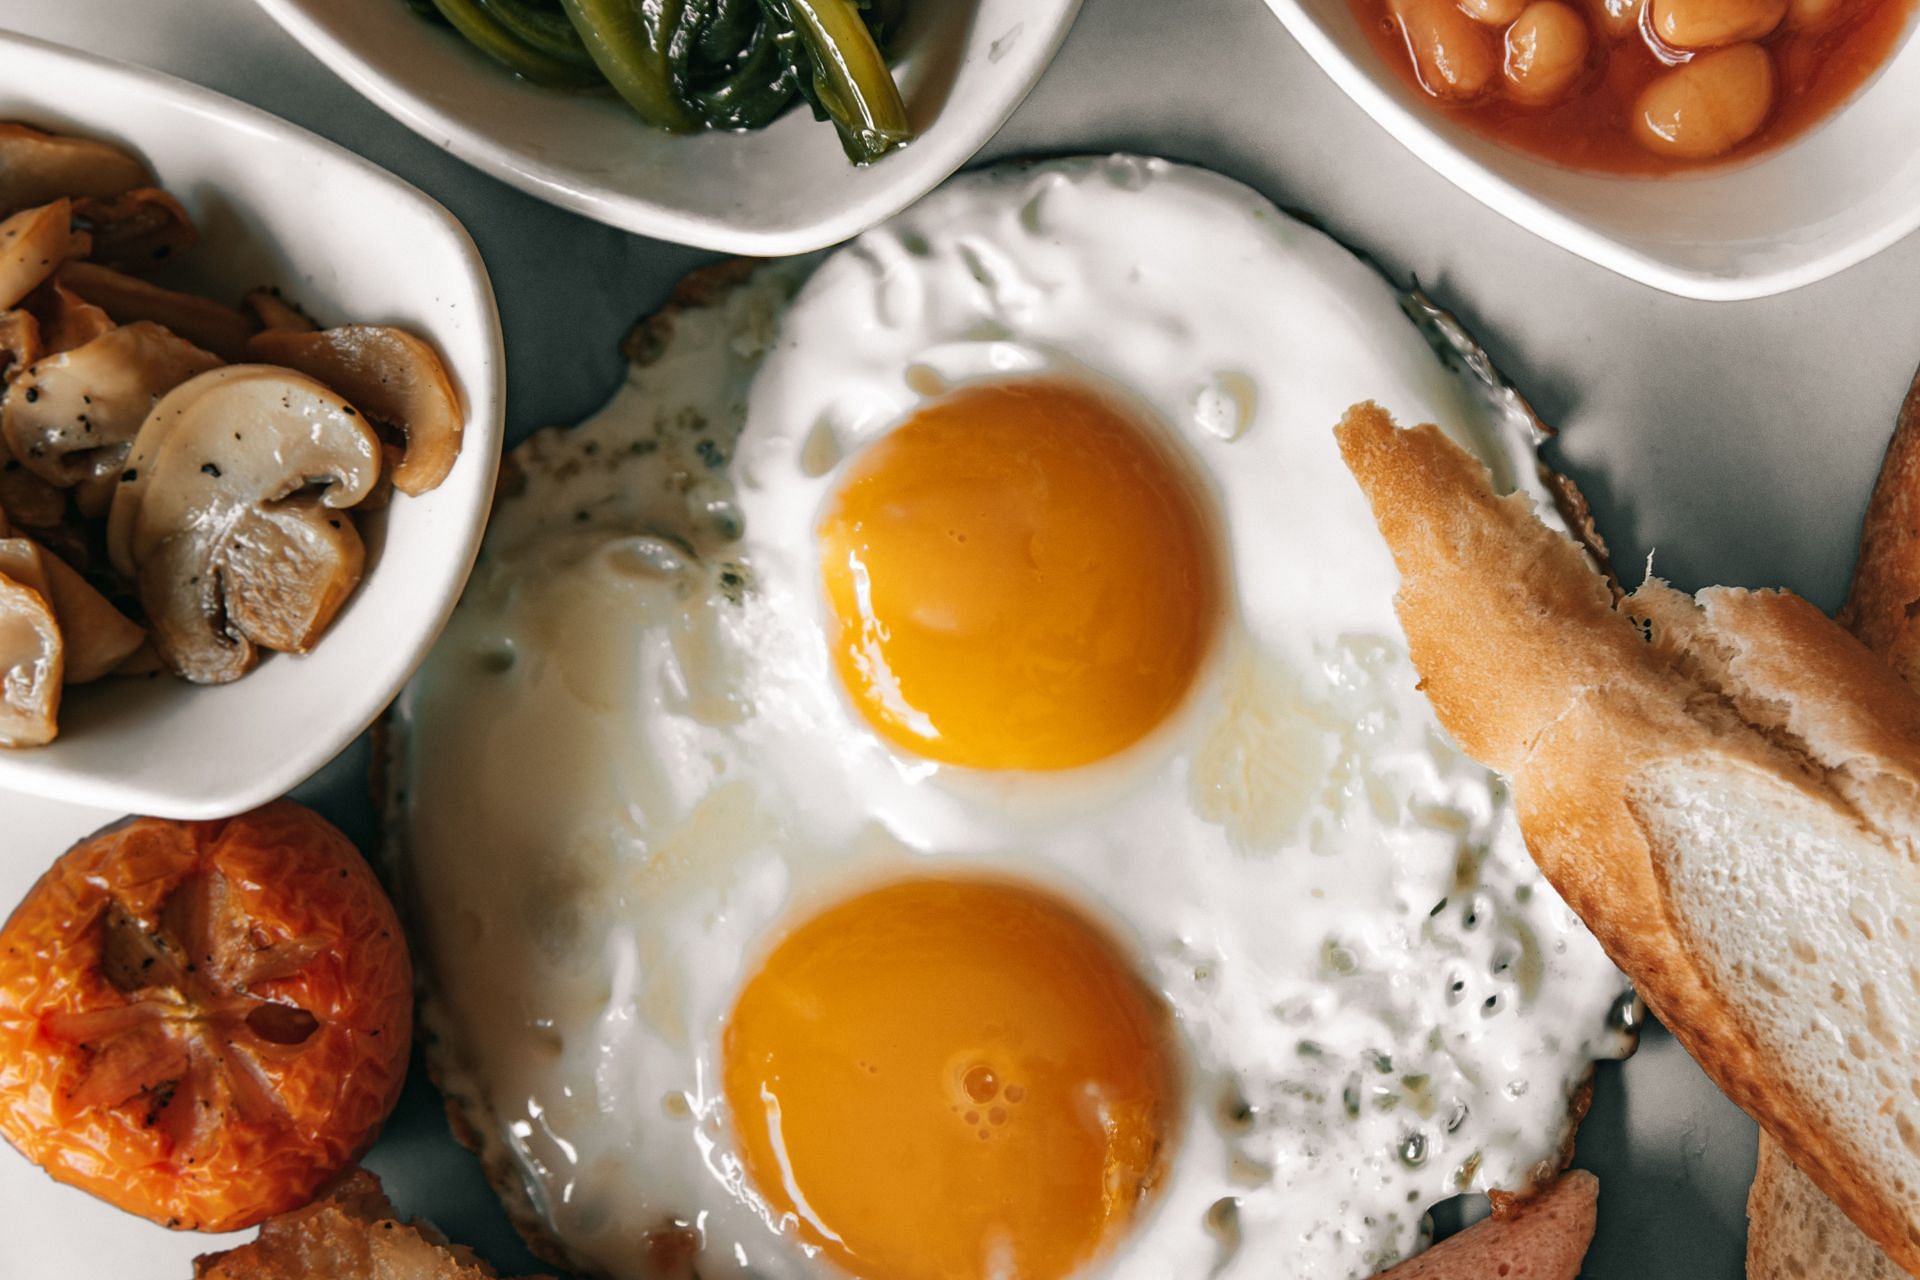 Eggs are rich in proteins and fats essential for muscle gain (Image via pexels/roman odintsov)